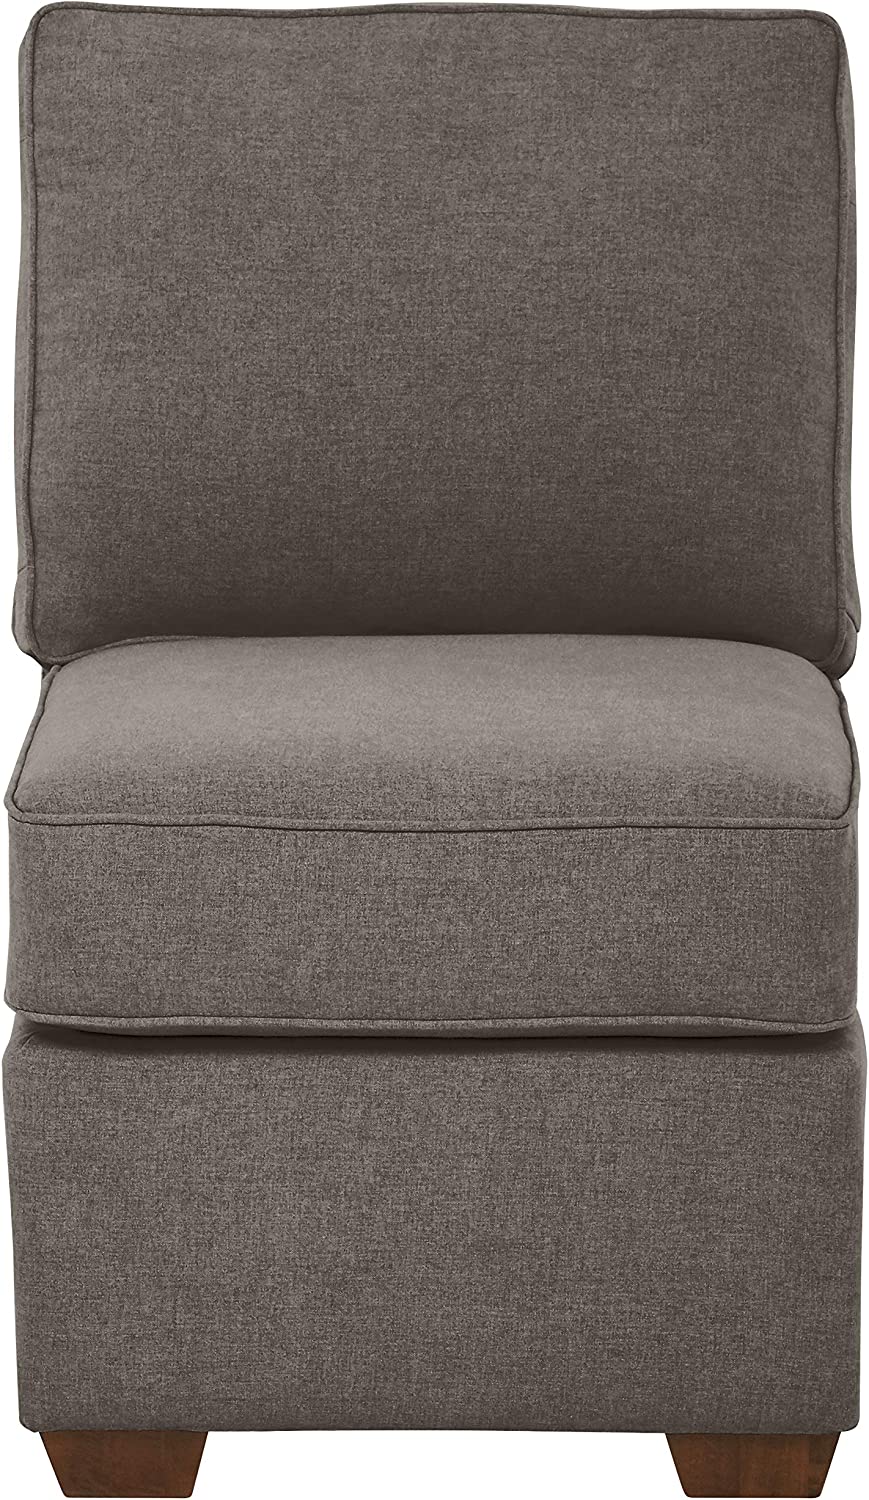 Amazon Brand – Stone & Beam Bagley Sectional Component Armless Chair, 23